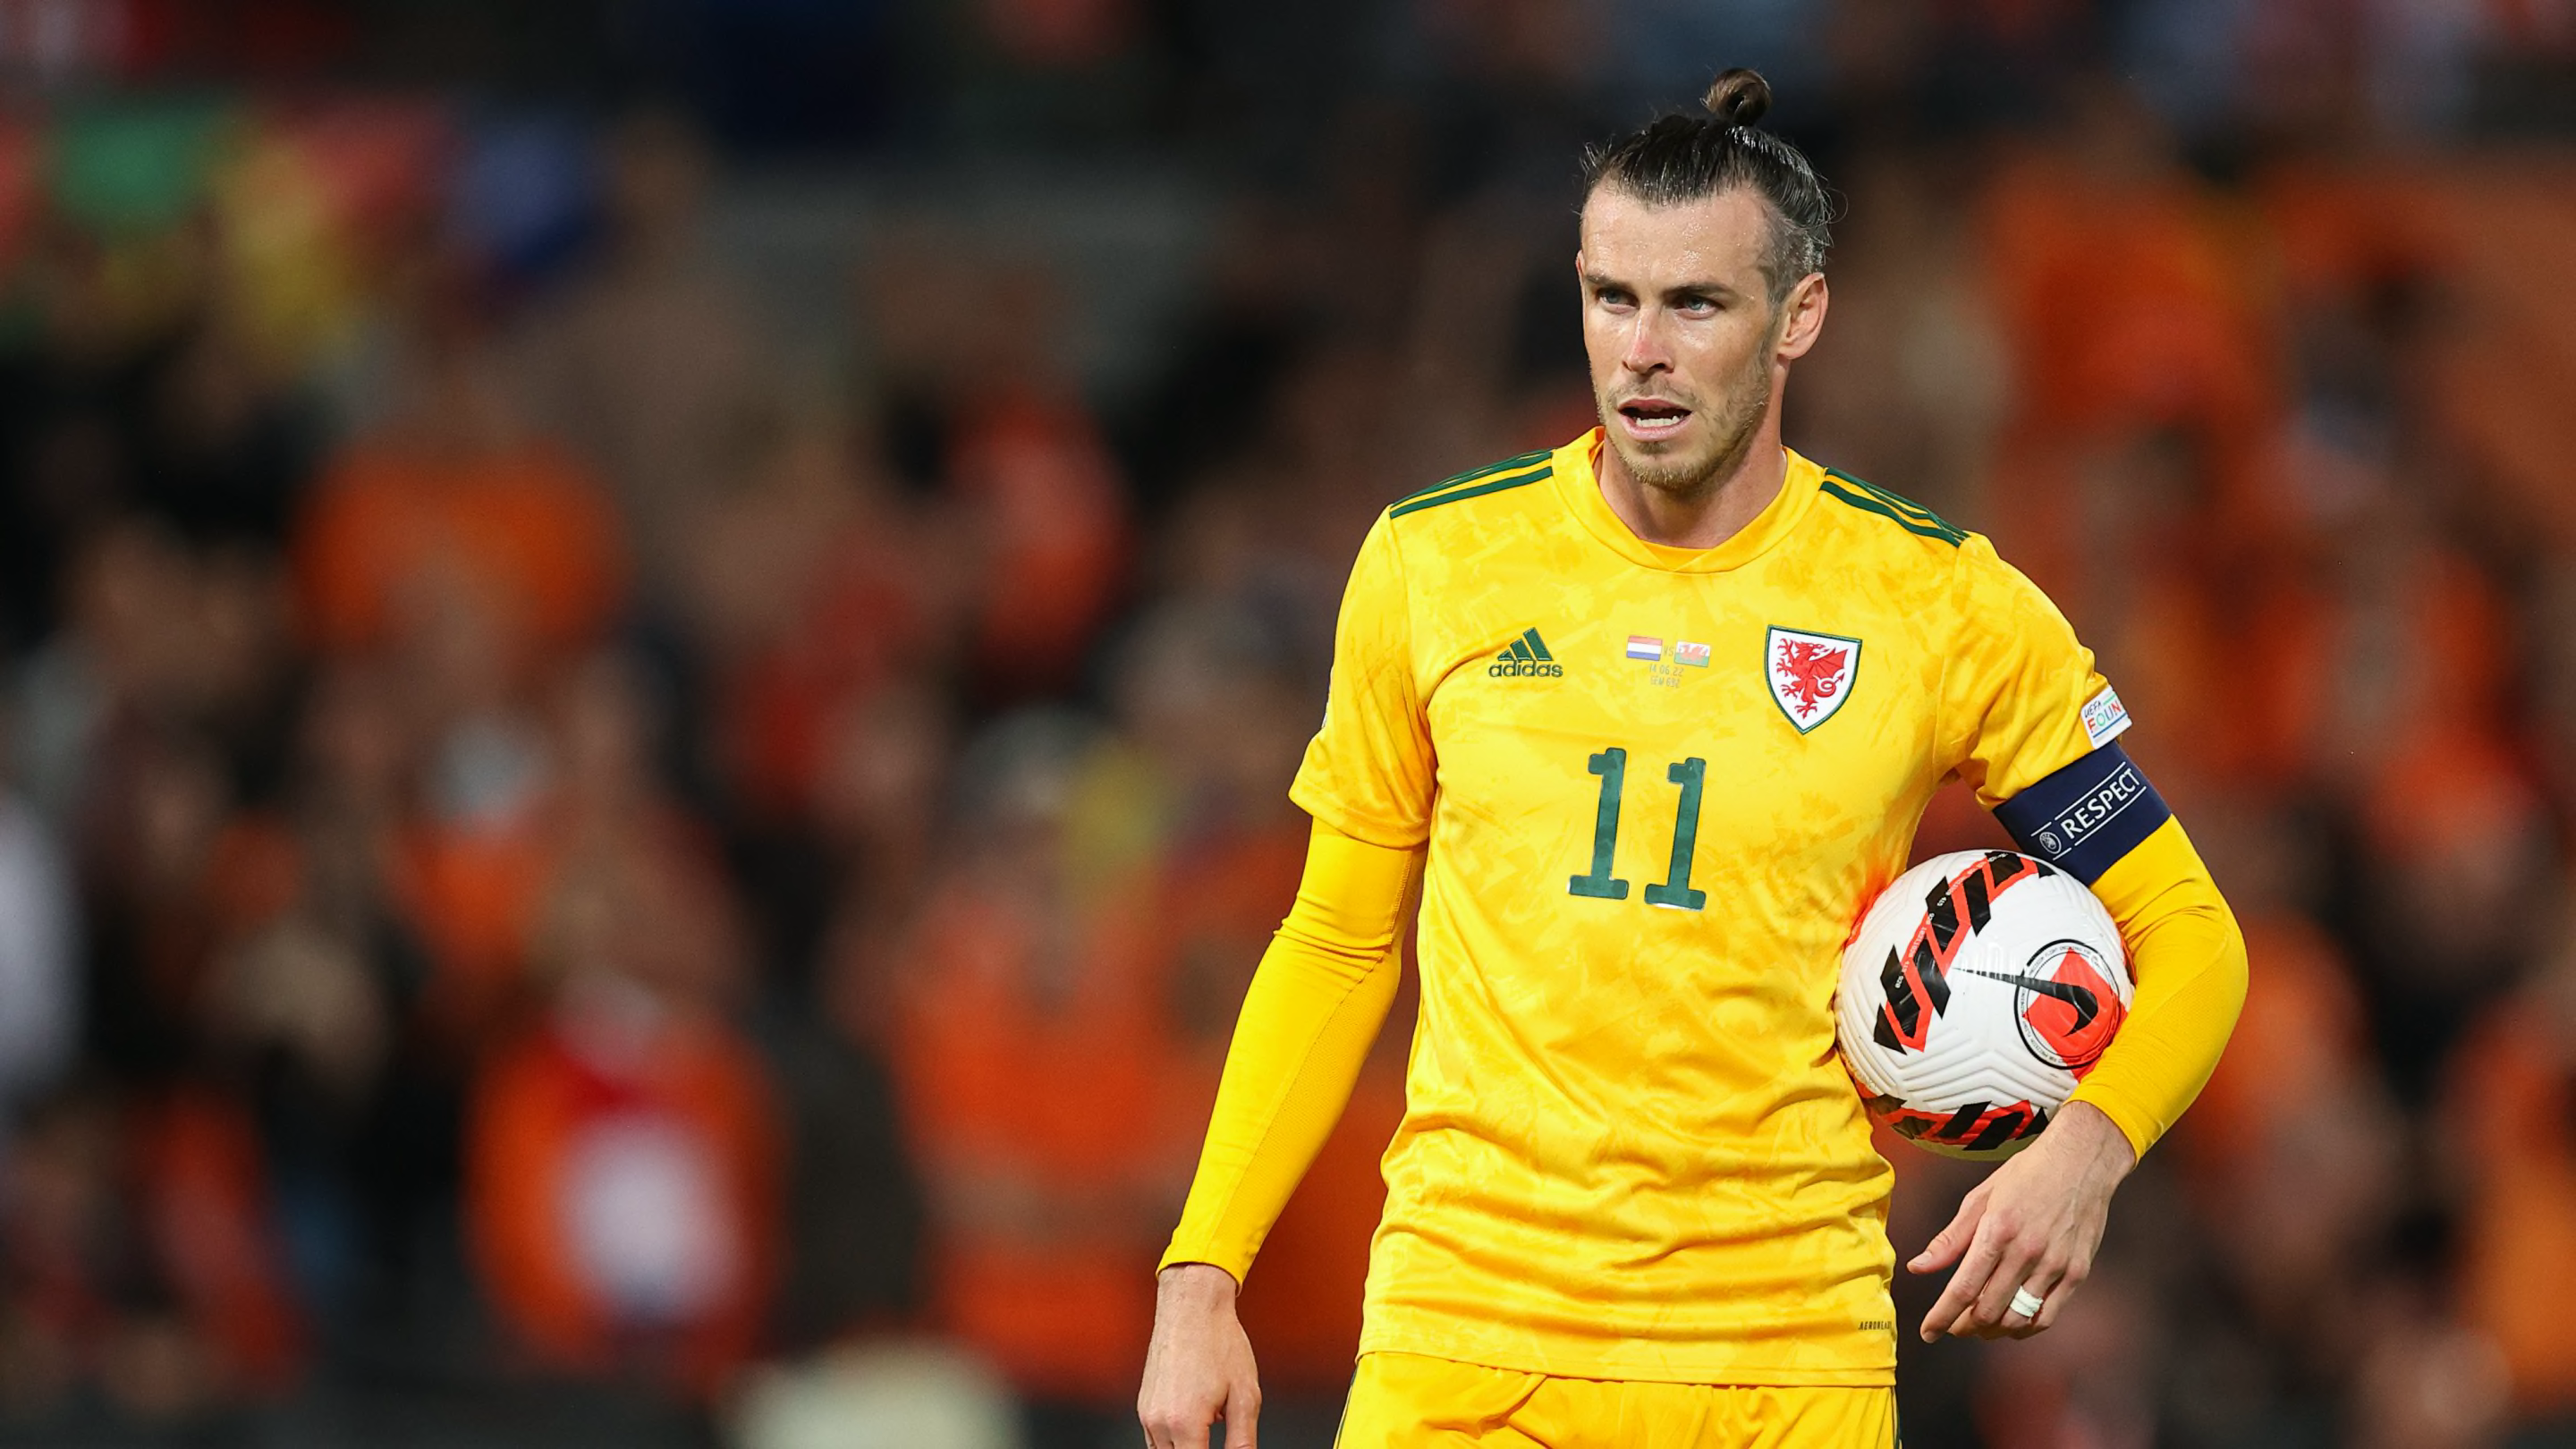 LAFC signing Gareth Bale is massive for the MLS